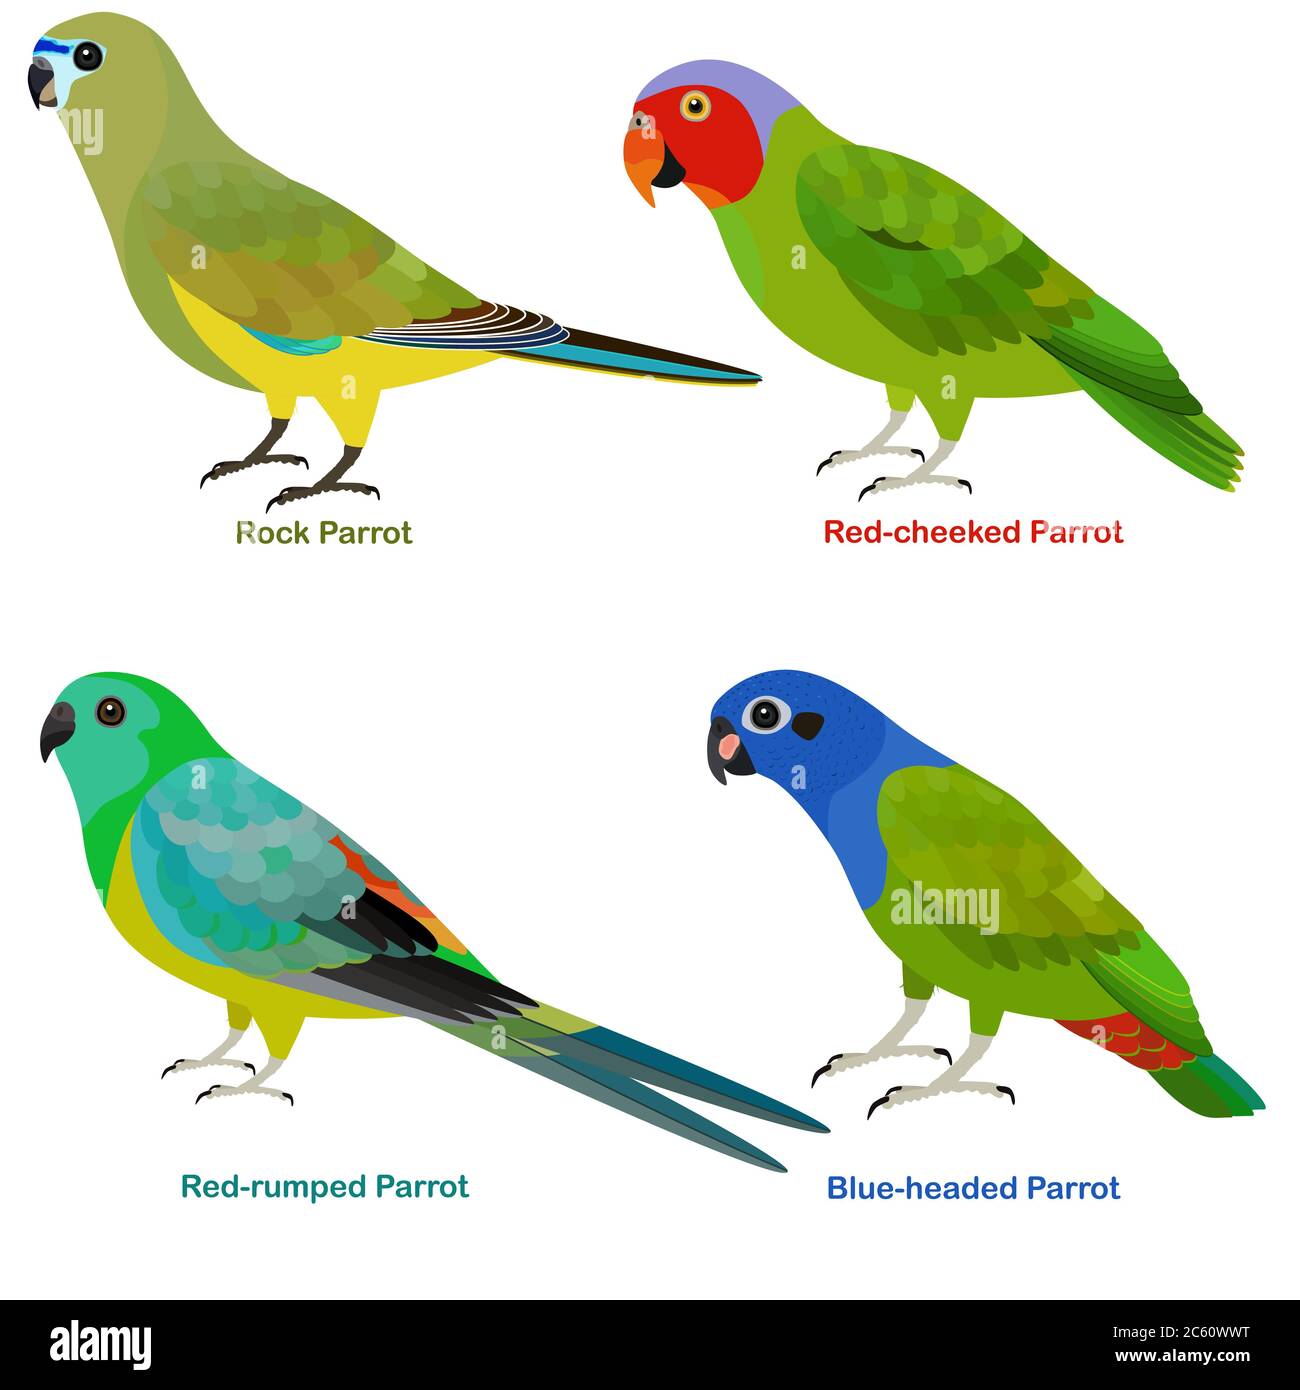 Cute Australia parrots bird vector illustration set, Rock, Blue-headed, Red-rumped, Red-cheeked Parrot, Colorful bird cartoon collection Stock Vector